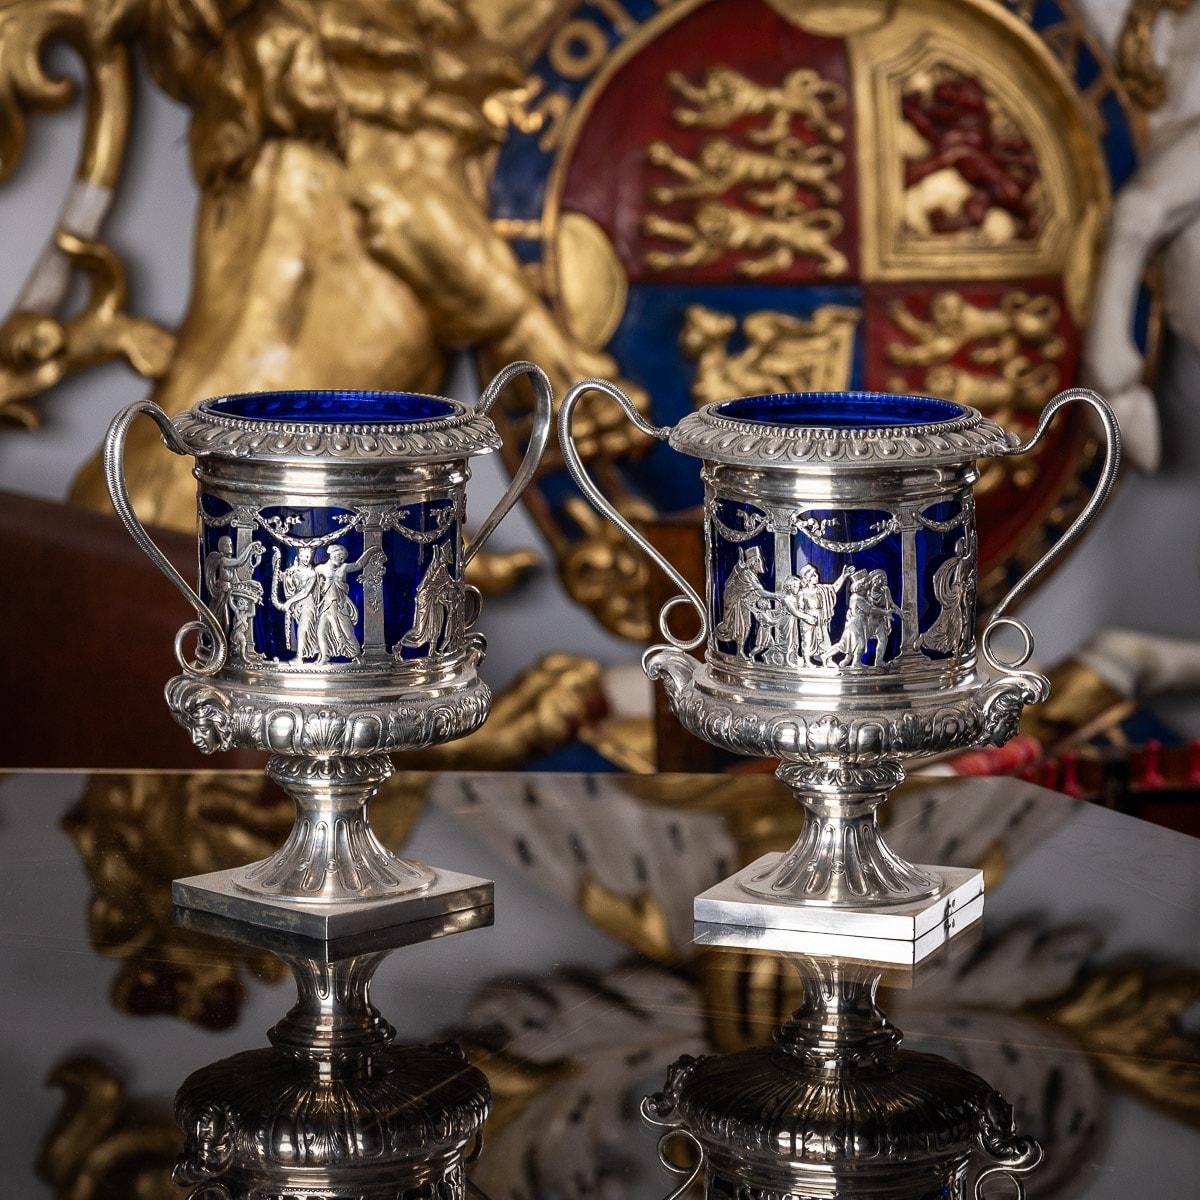 Antique early 20th century German pair of solid silver & royal blue glass wine coolers. Of campana form, the sides applied with frieze of classical biblical scenes, beside Grecian columns and laurel garlands, to each side applied with twisted snake